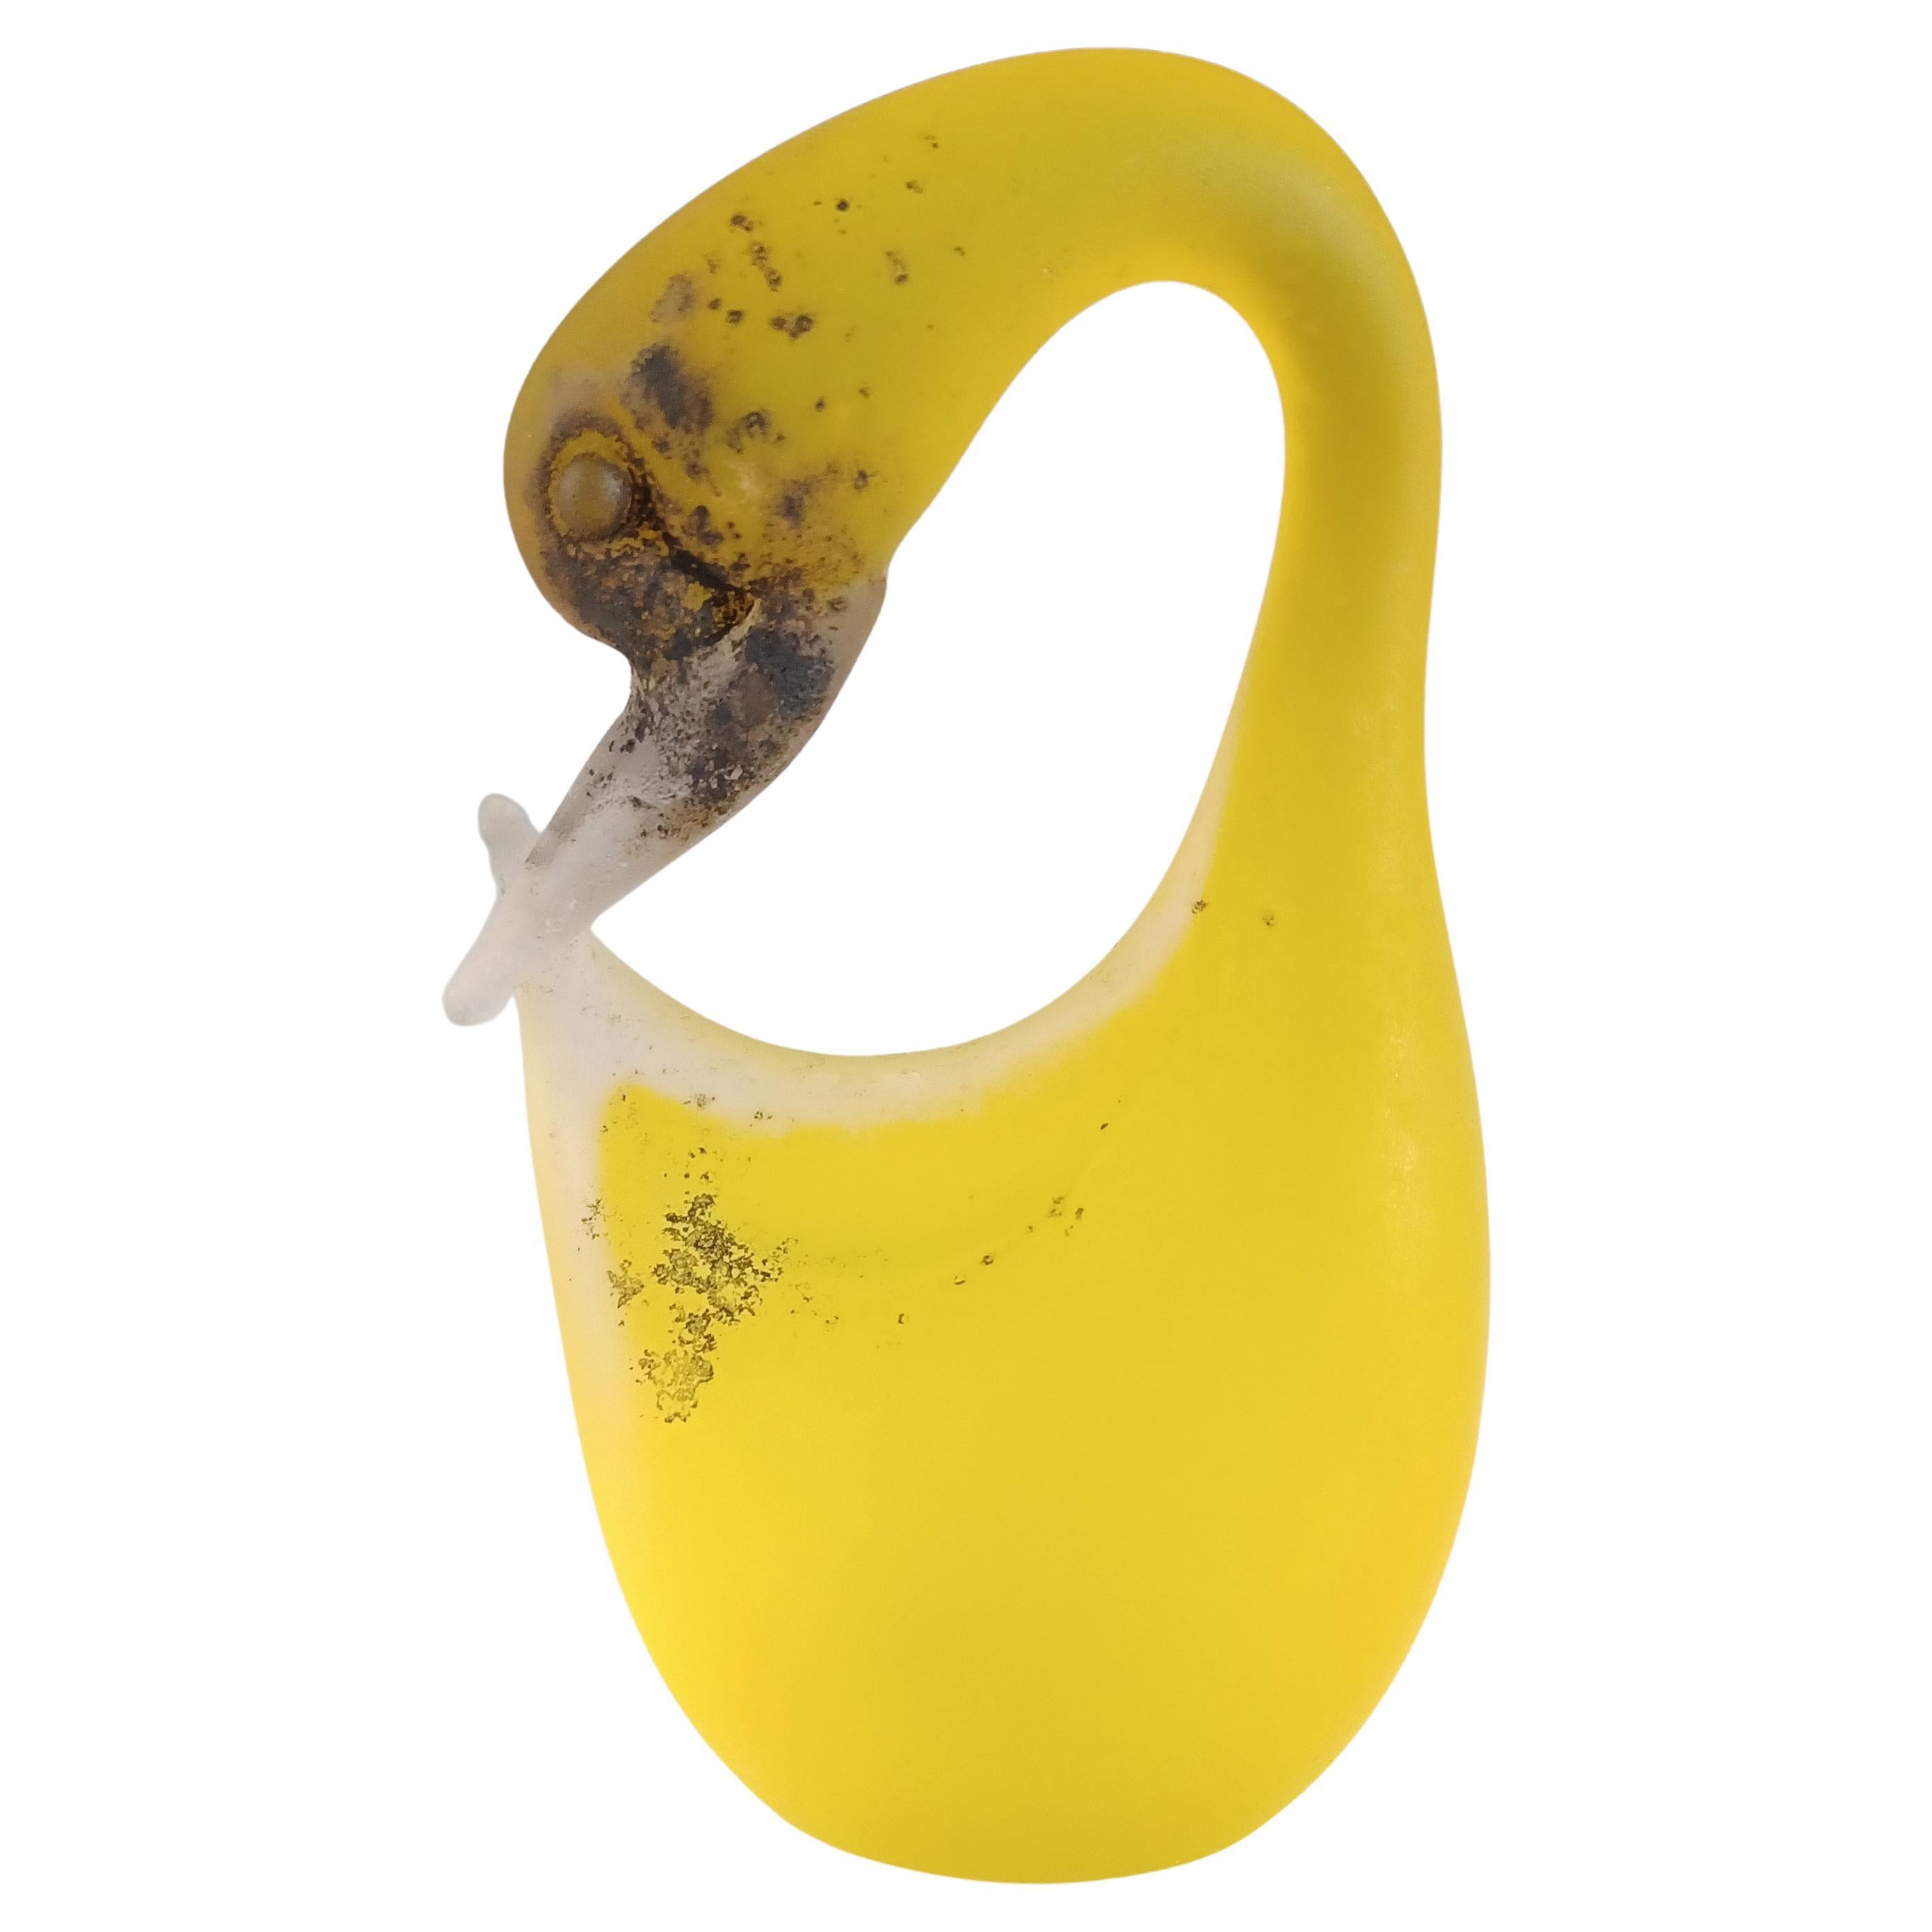 SIGNED Cenedese Murano 'Scavo' Yellow Glass Swan Sculpture For Sale